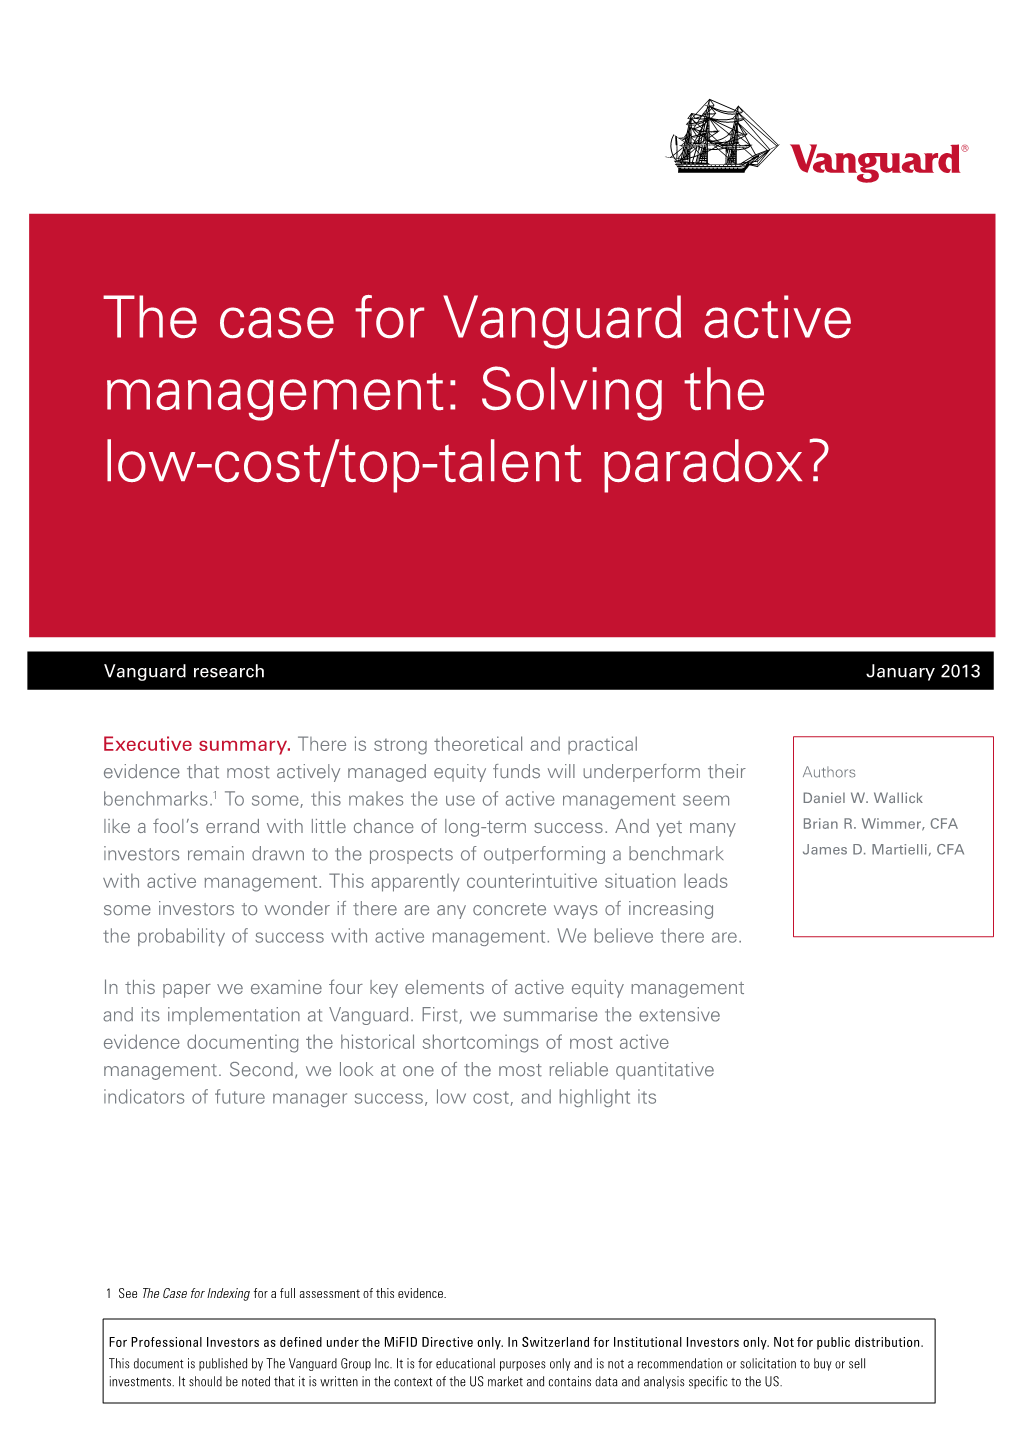 The Case for Vanguard Active Management: Solving the Low-Cost/Top-Talent Paradox?